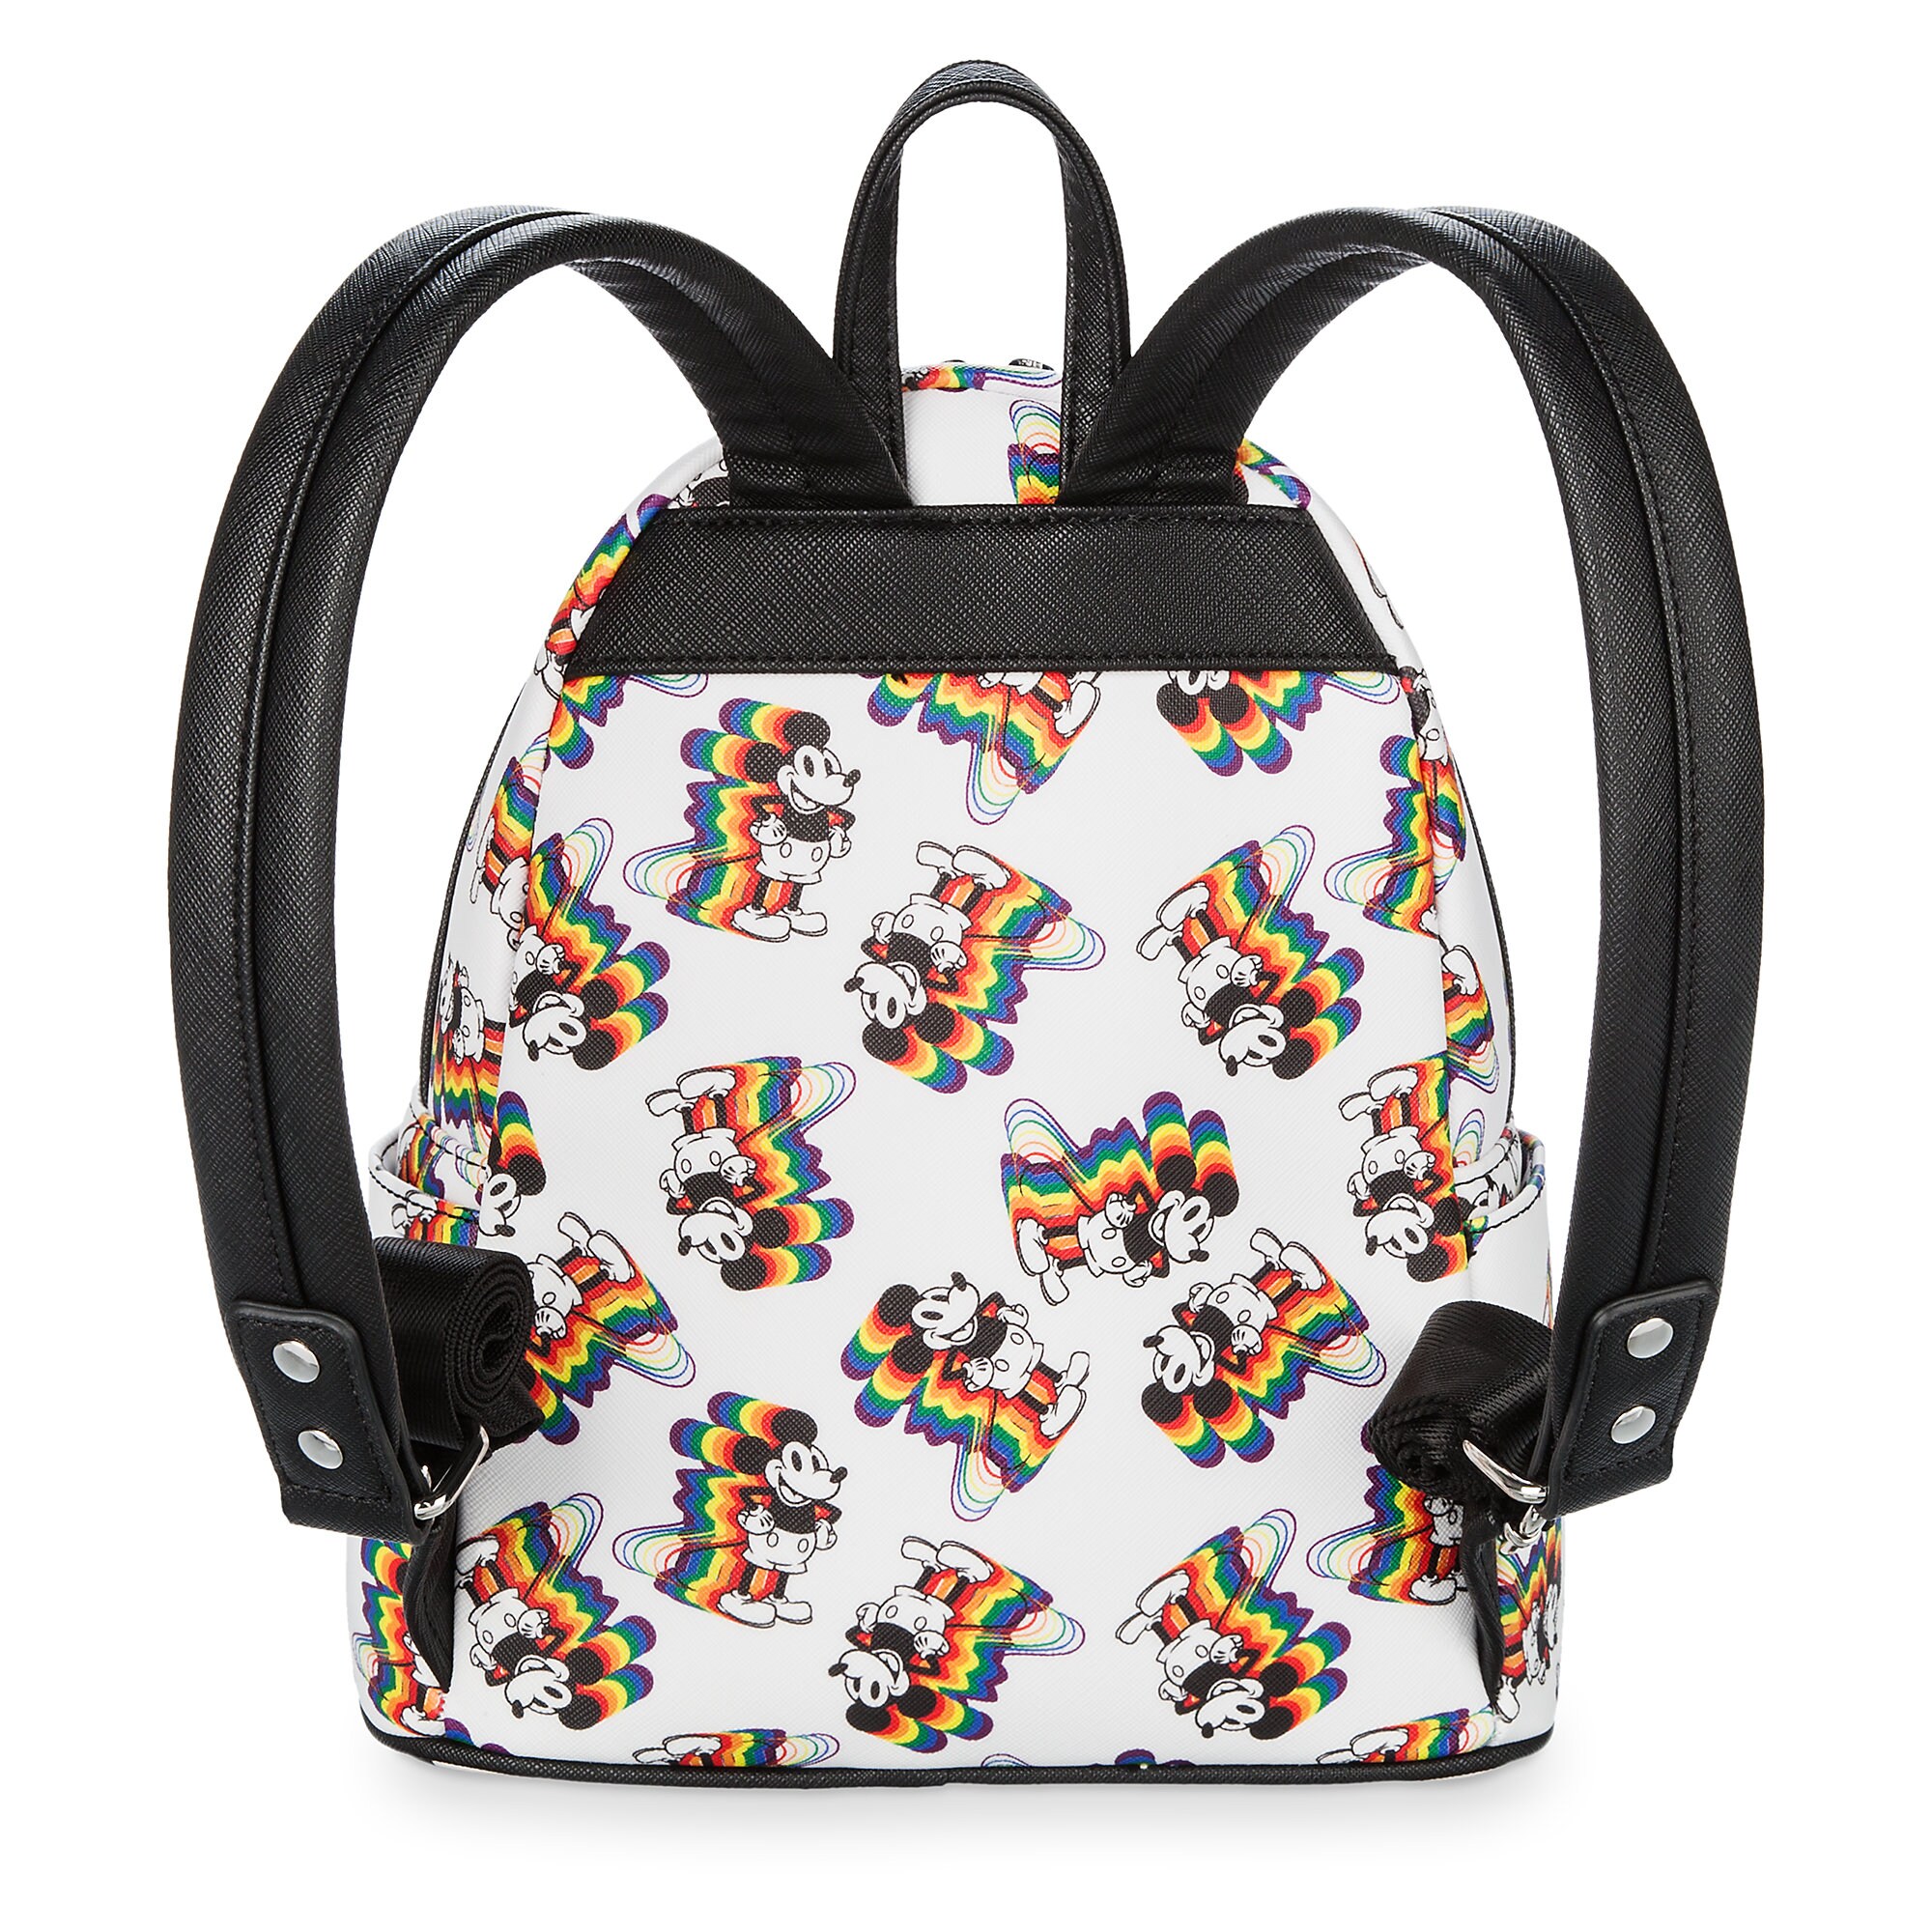 Mickey Mouse Rainbow Mini Backpack by Loungefly